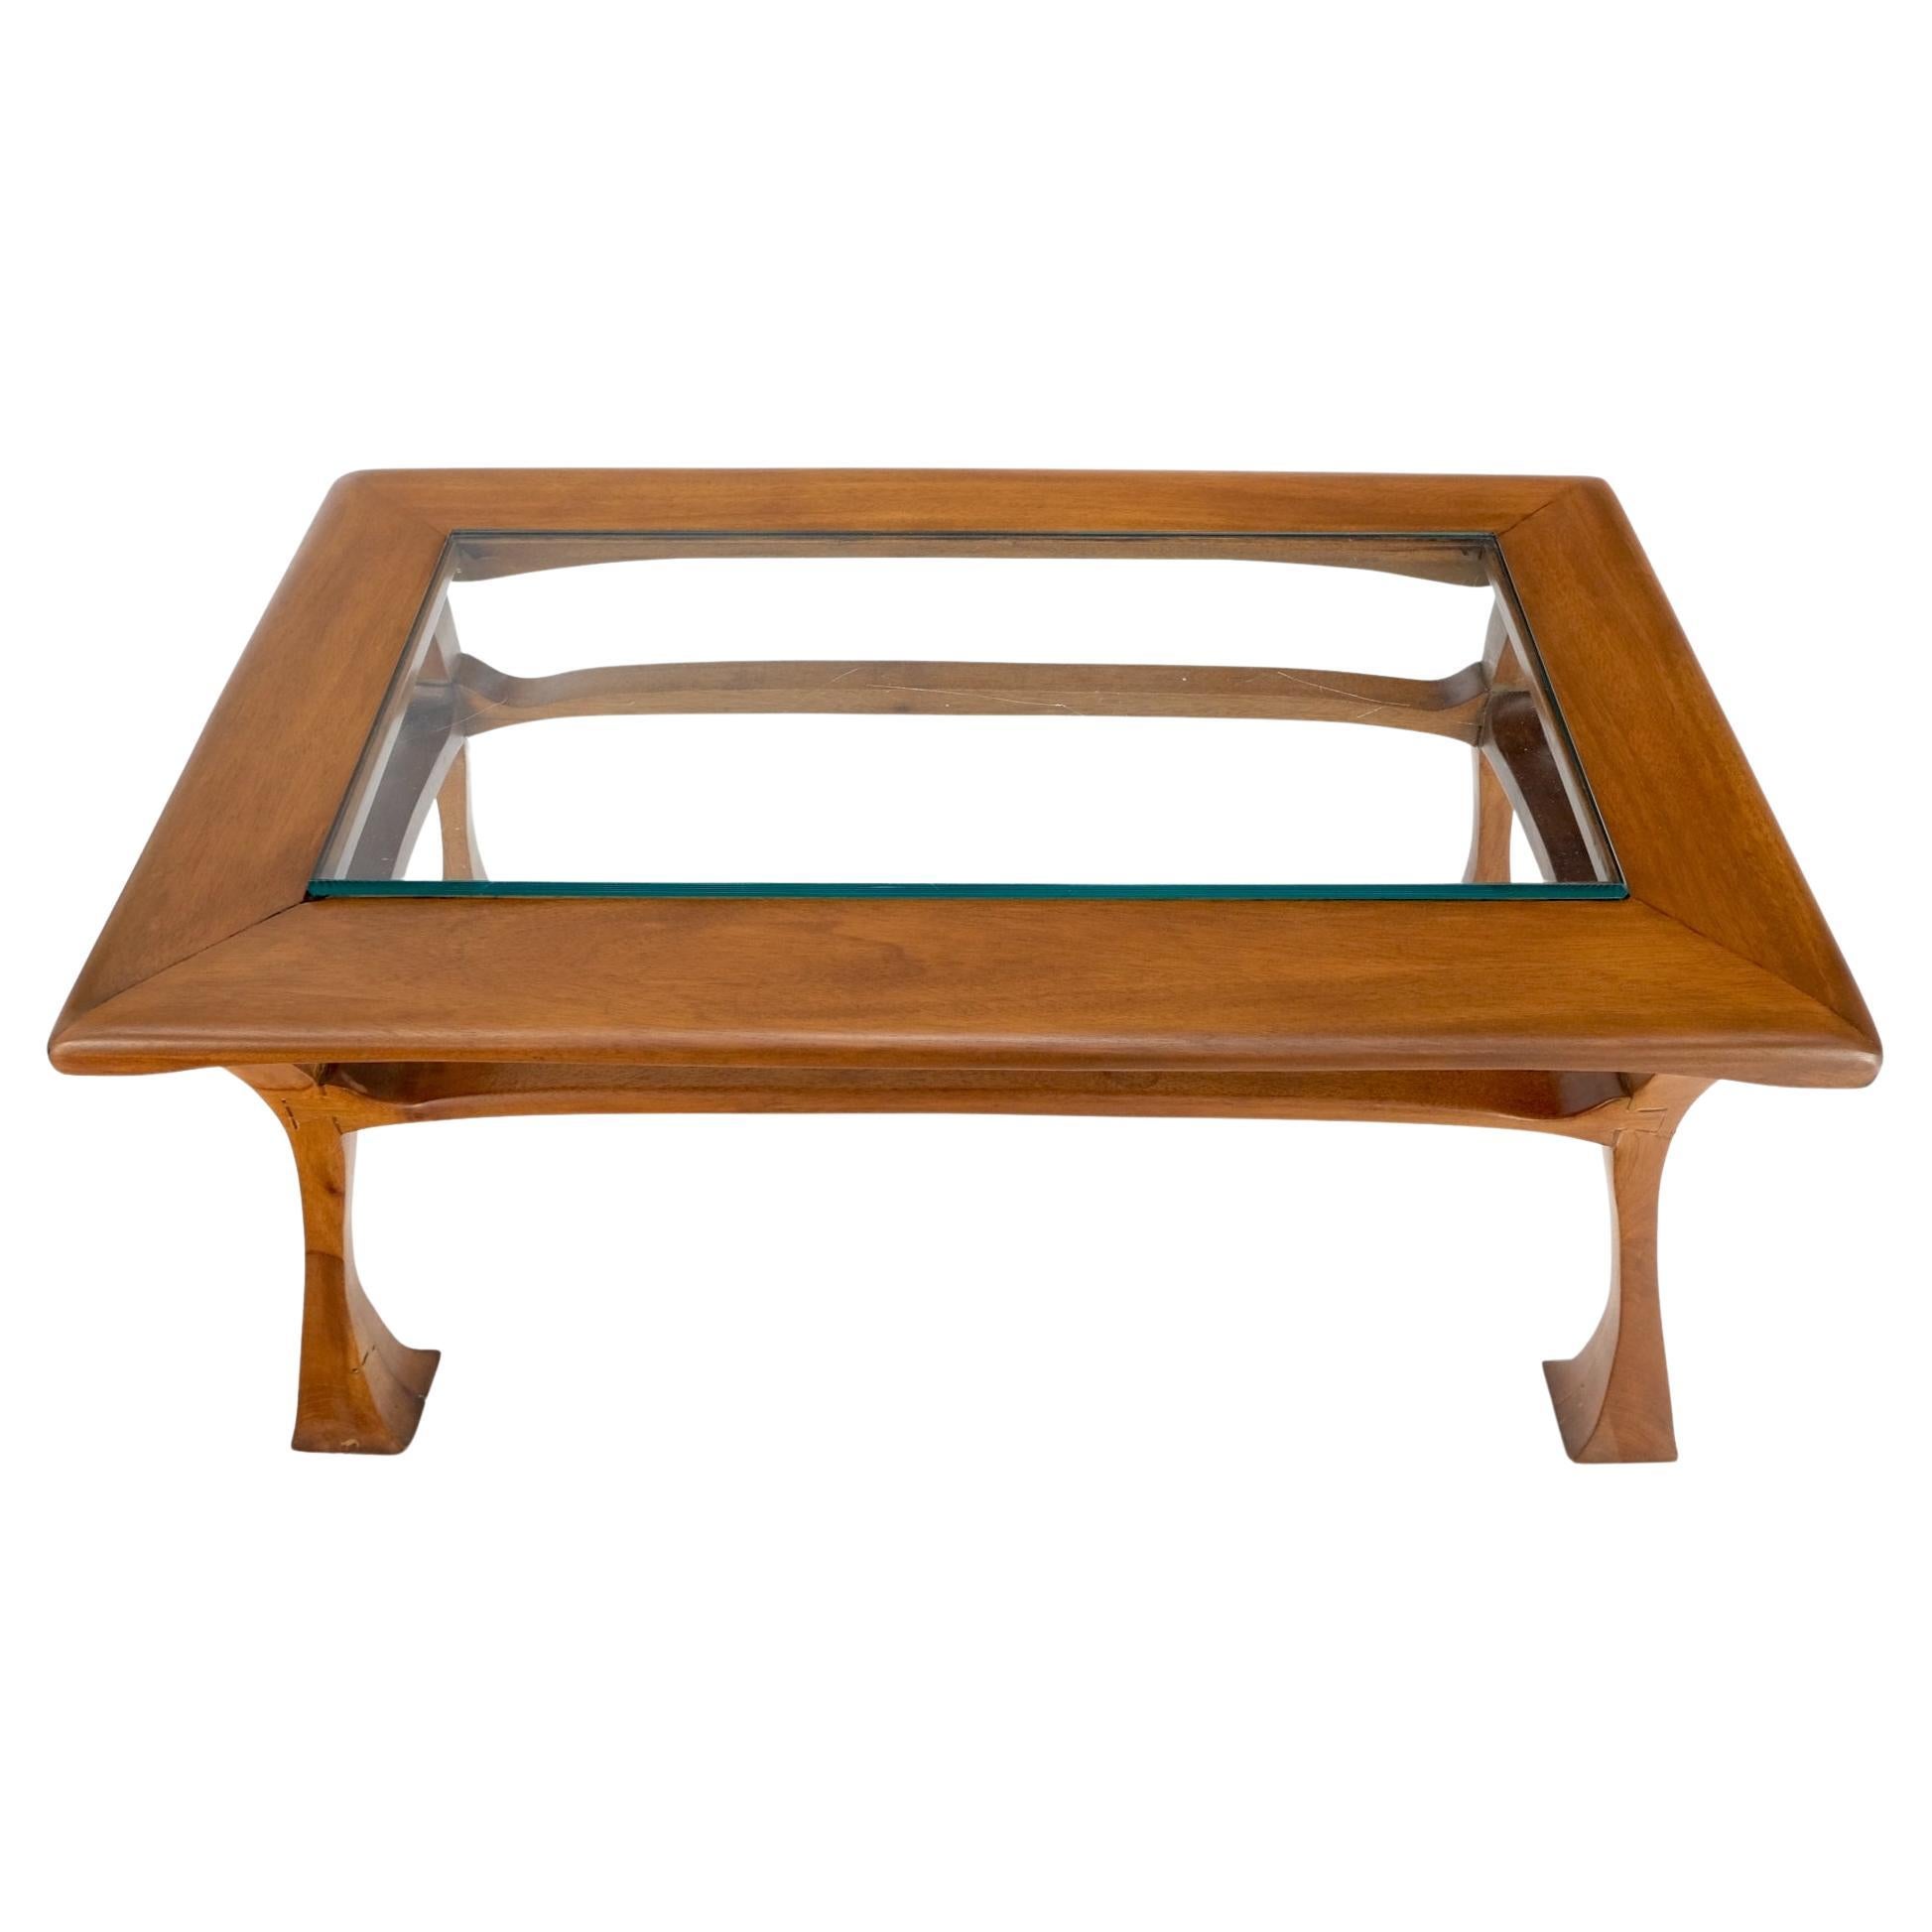 Art Nouveau Solid Carved Teak Unusual Rectangle Coffee Table Thick Glass Top For Sale